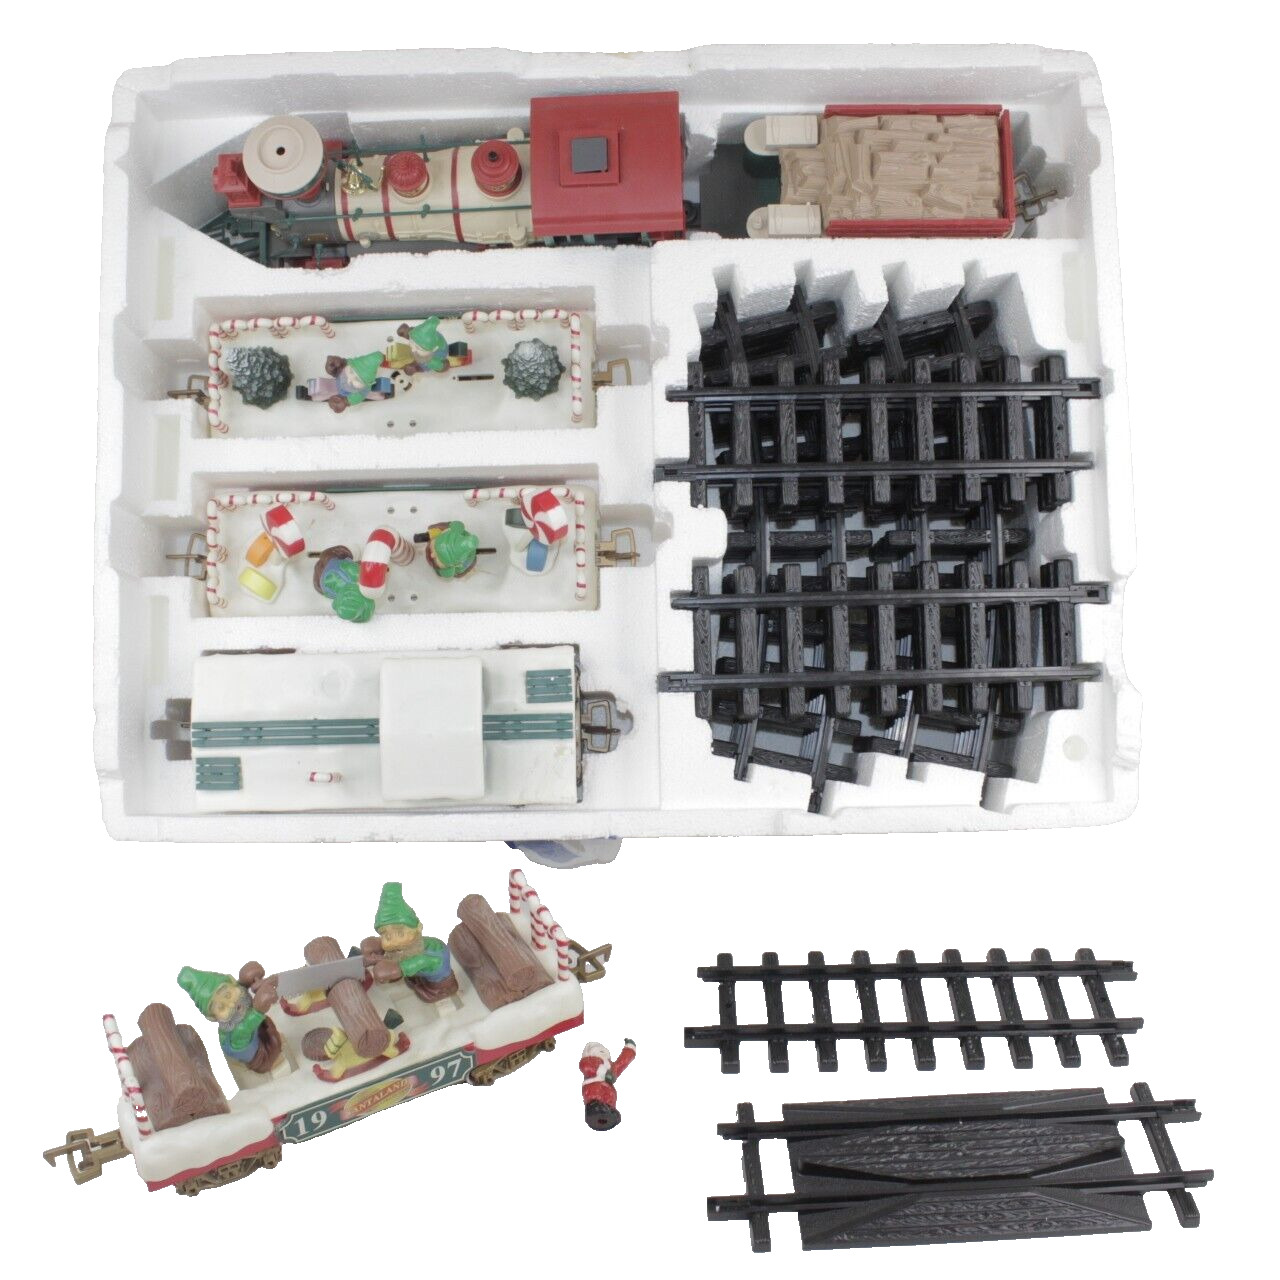 New Bright QVC Exclusive Santaland Christmas Train Set with Extra Car & Track